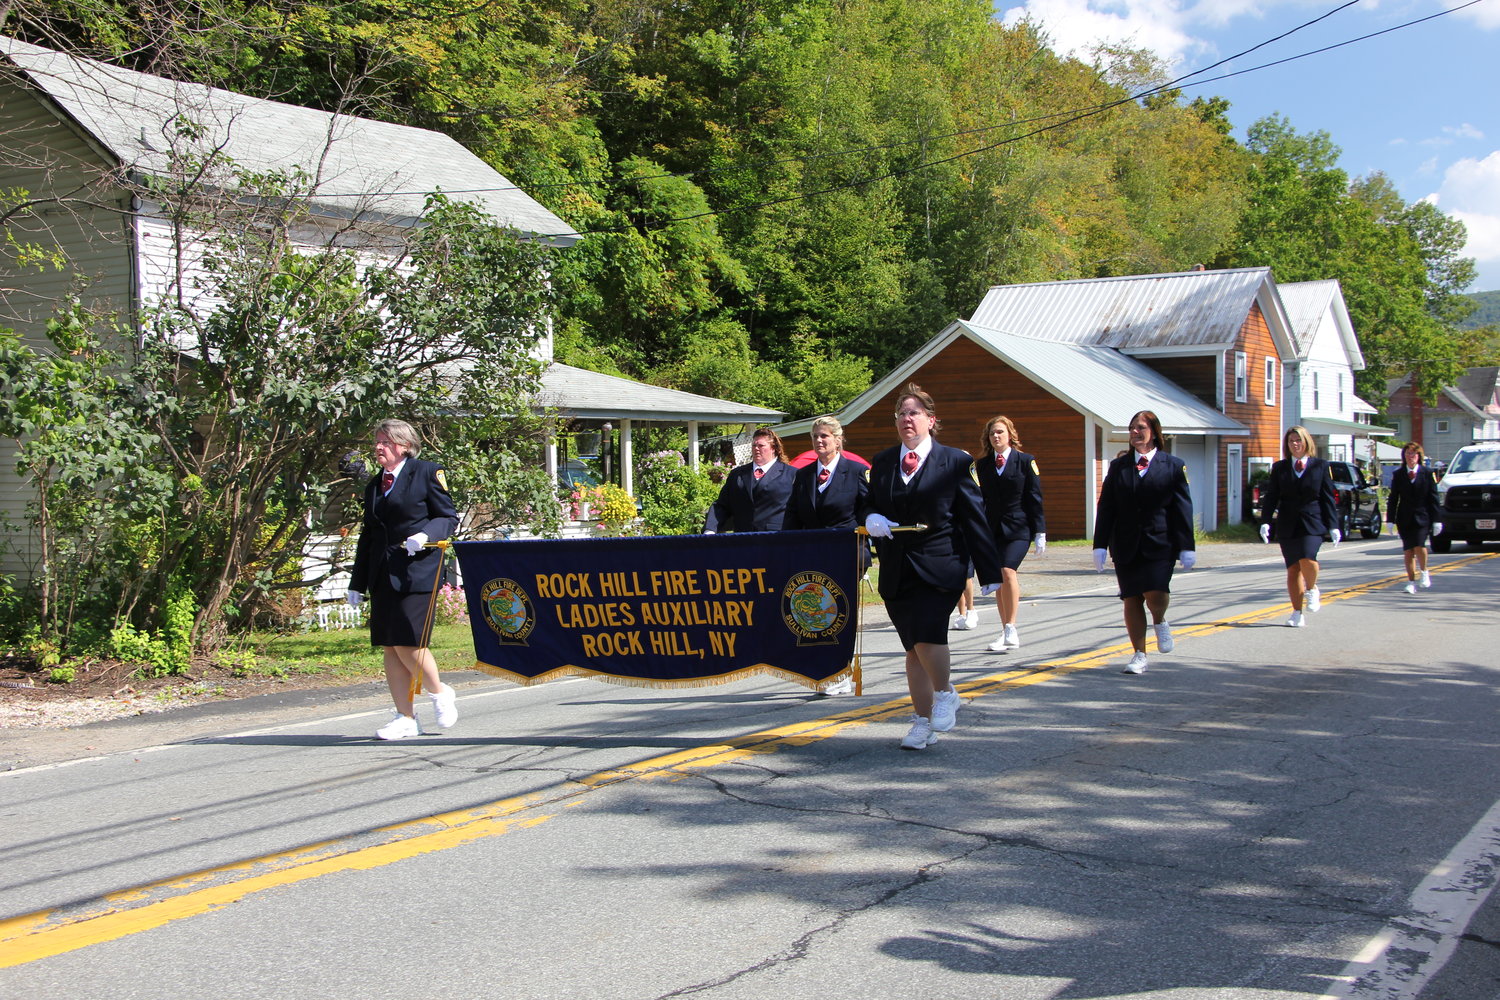 The Rock Hill Fire Department Ladies Auxiliary took part in the parade.